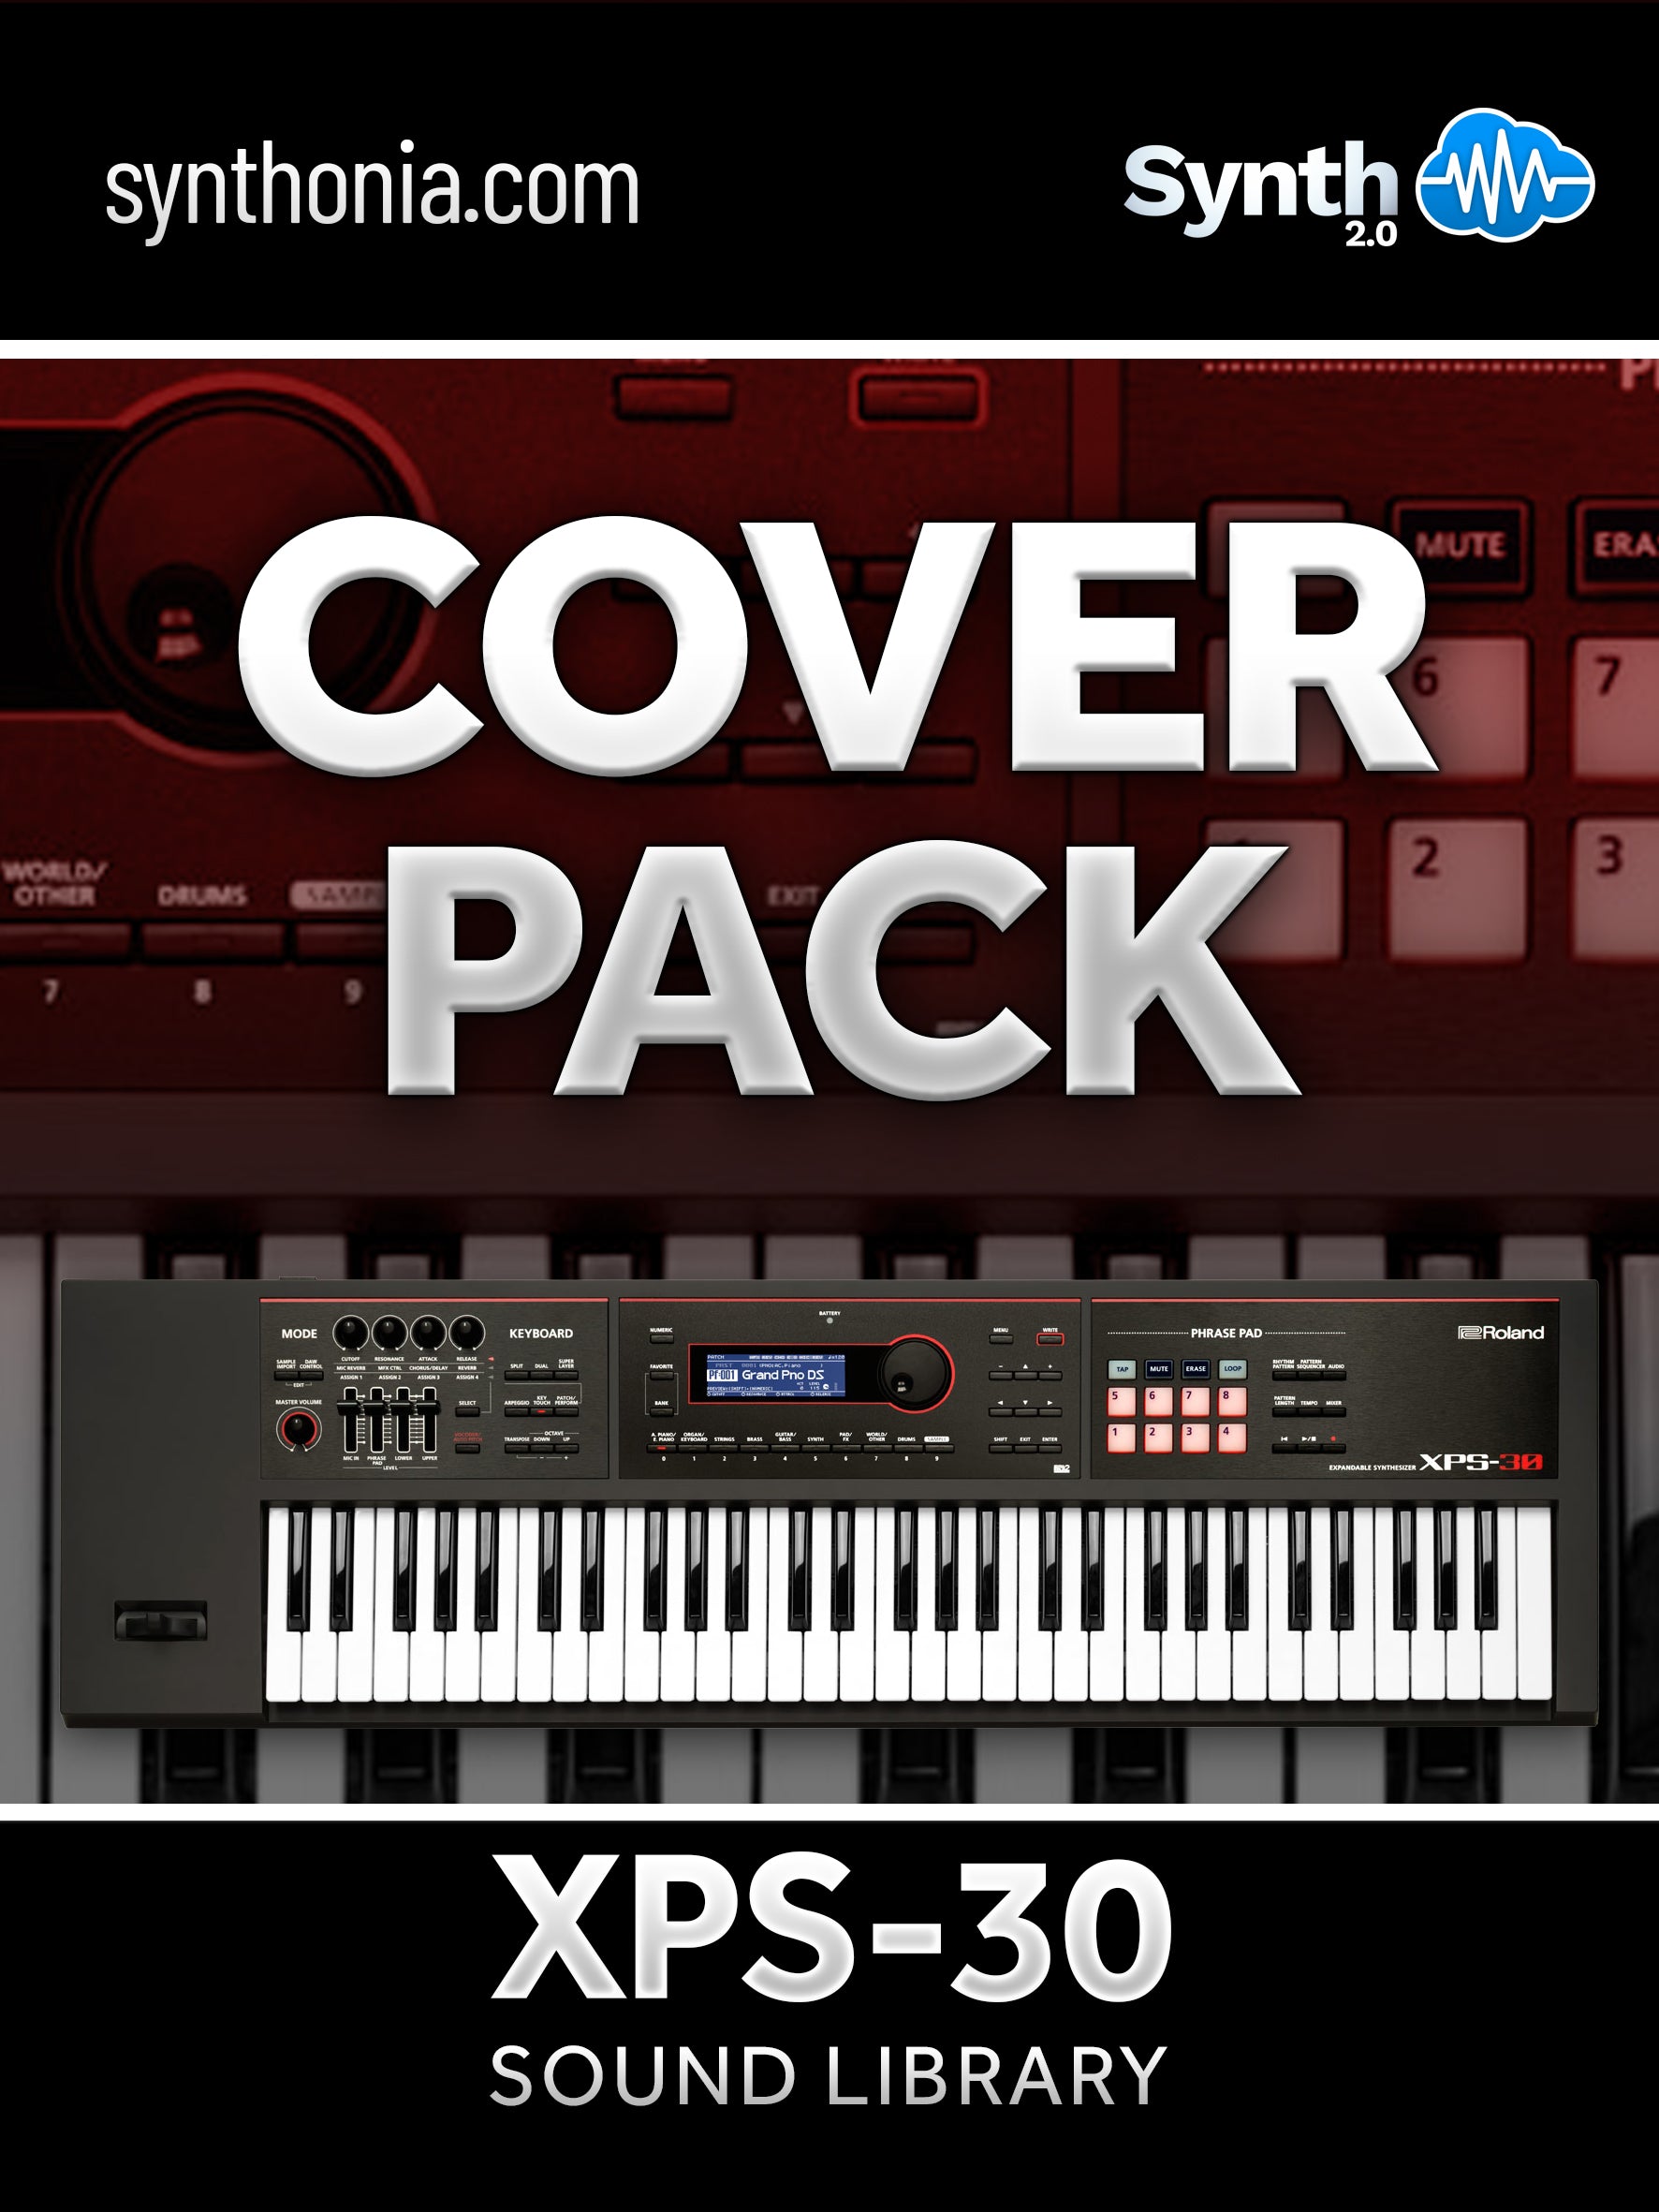 SCL031 - Cover Pack - XPS-30 ( 16 presets )